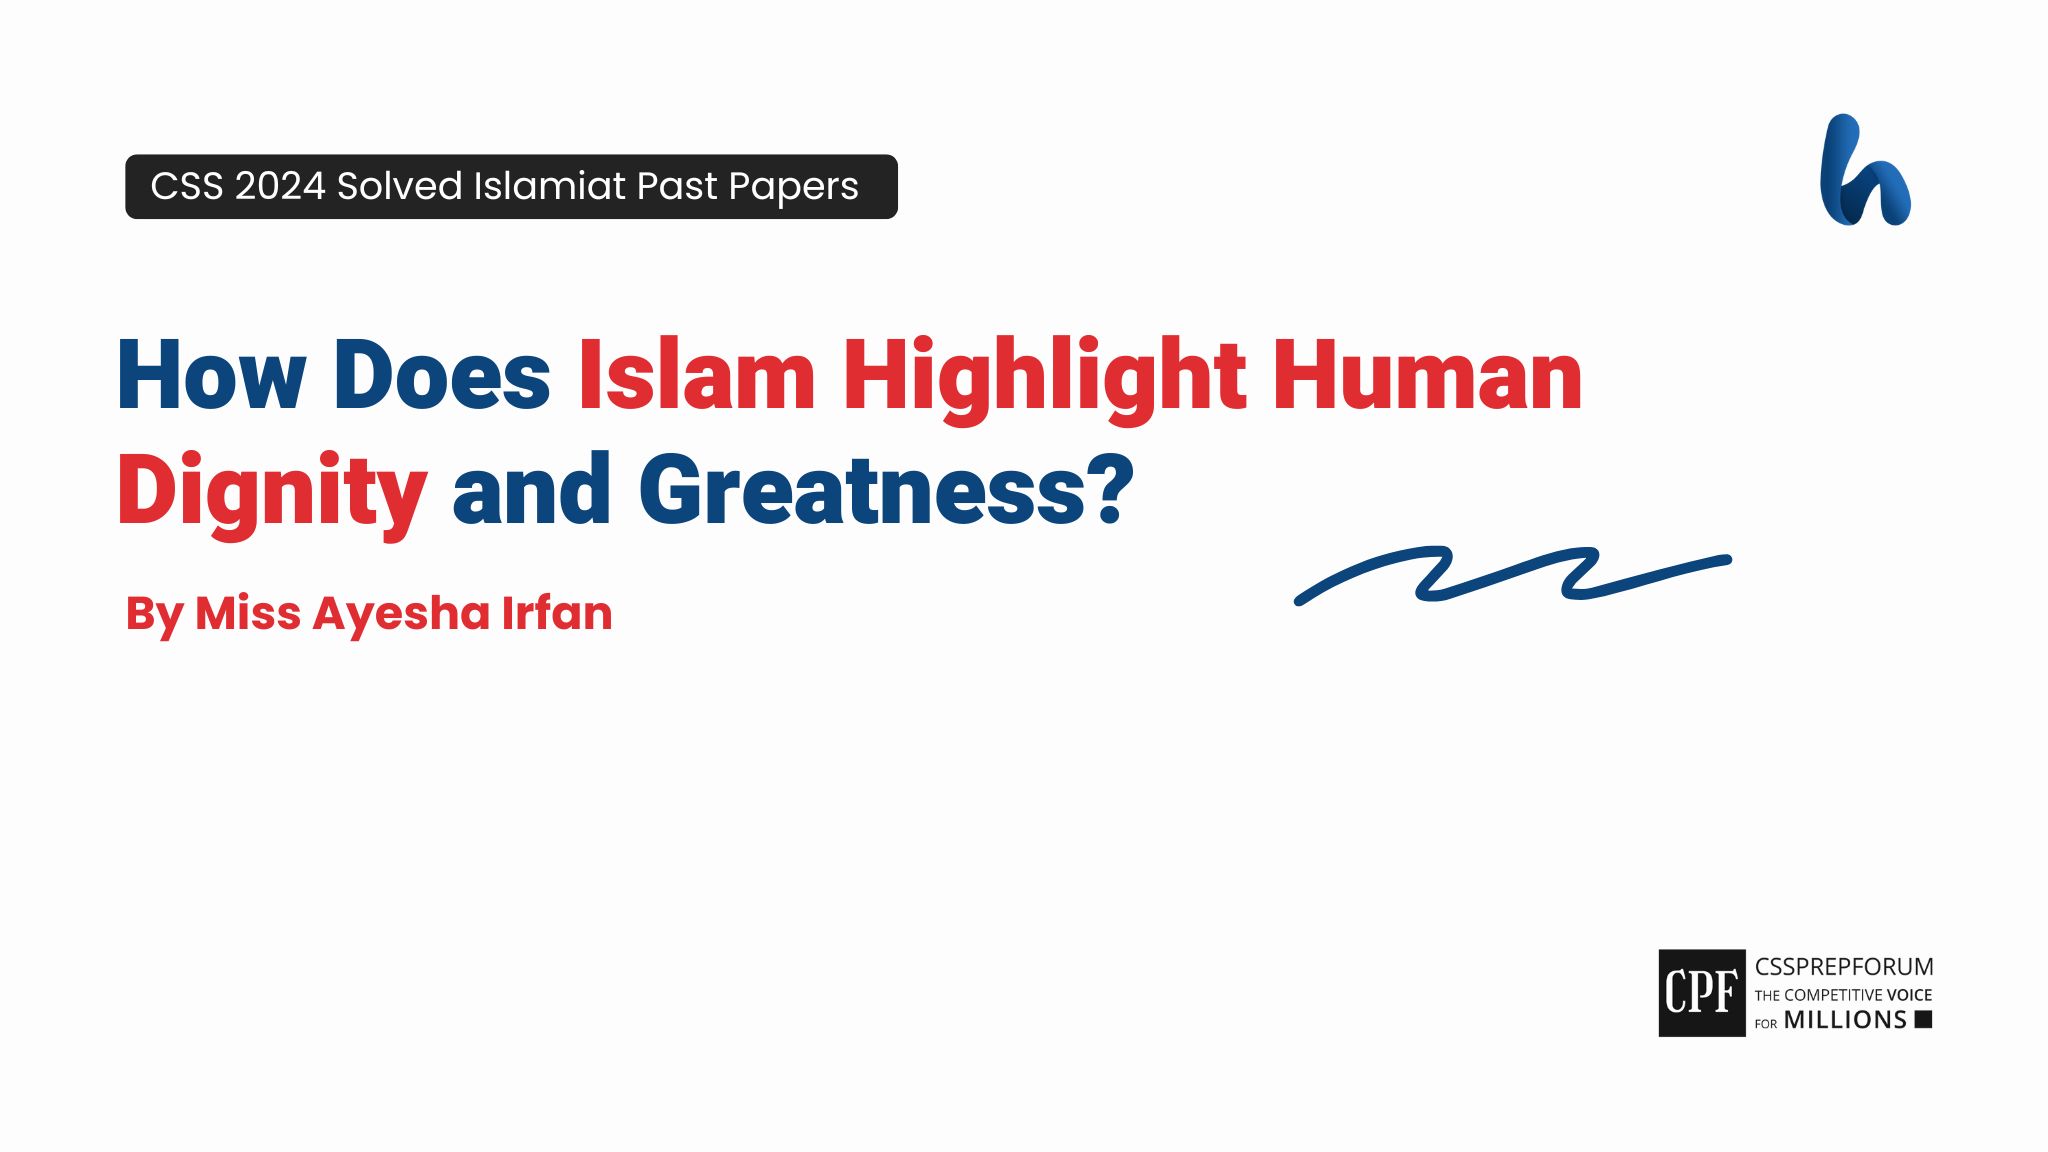 CSS Islamiat 2024 question, "Human Dignity and Greatness in Islam" is Solved by Miss Ayesha Irfan...